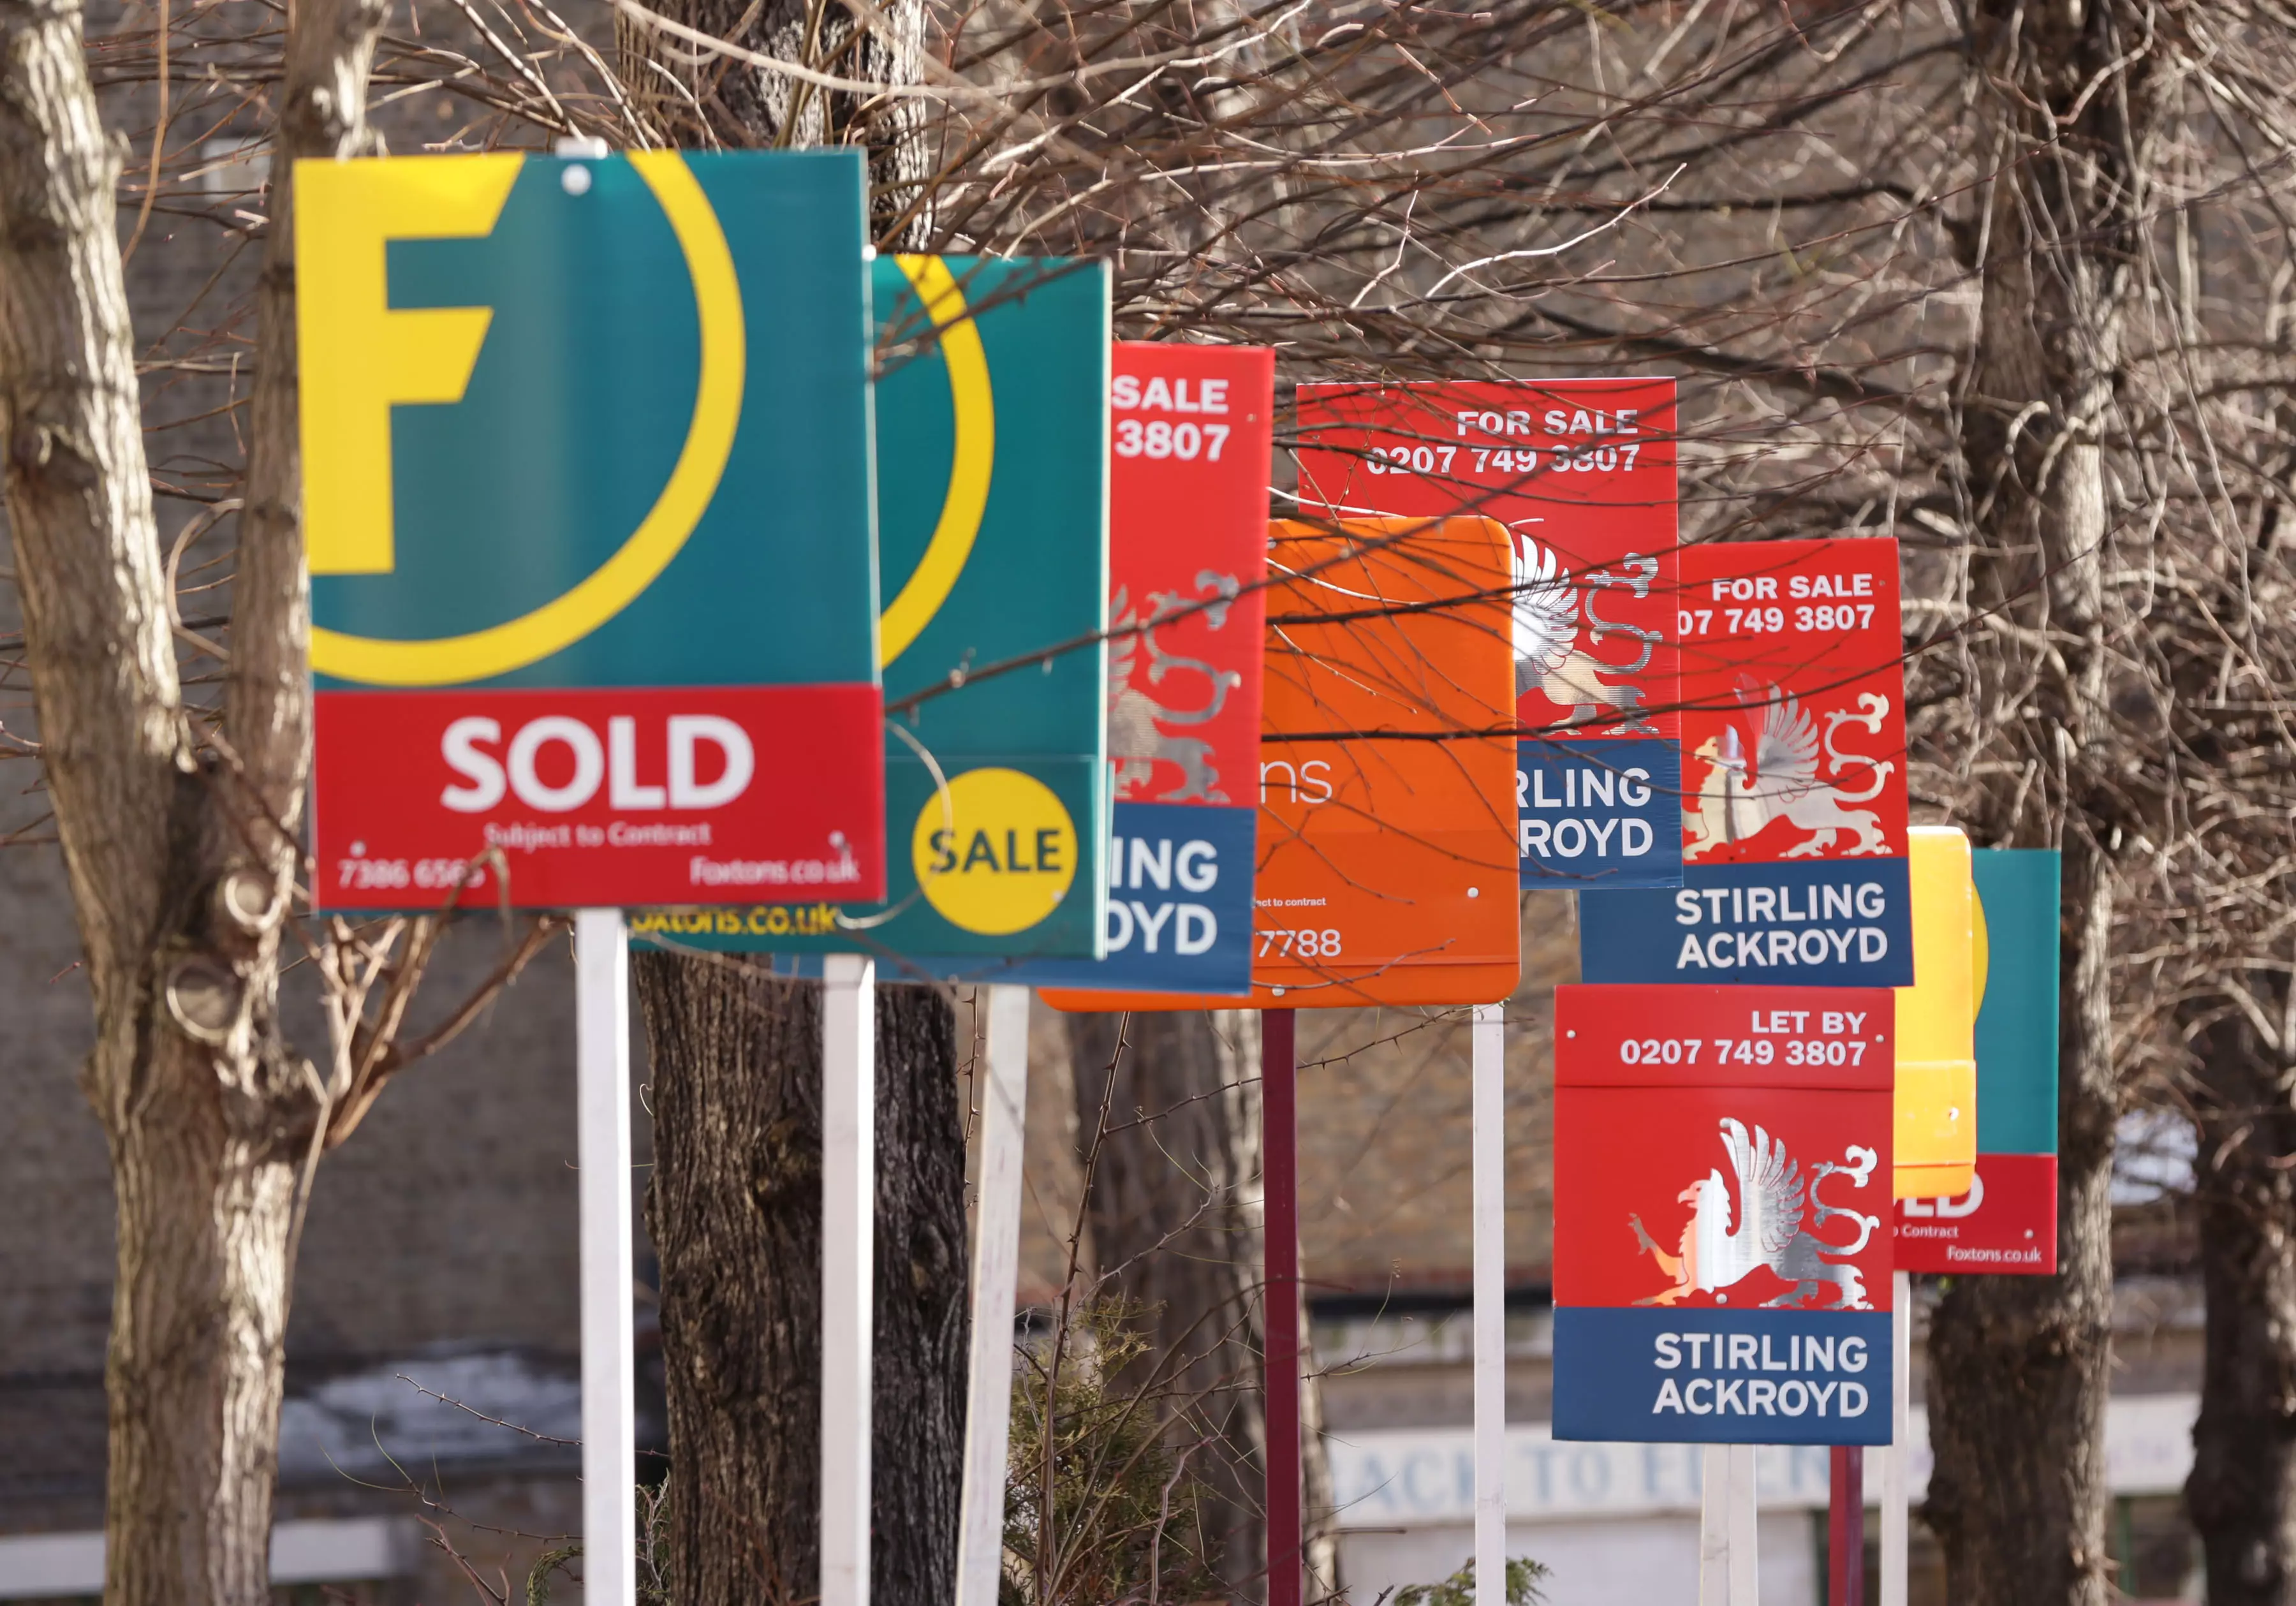 Landlords and agencies are paying up hundreds to their tenants (